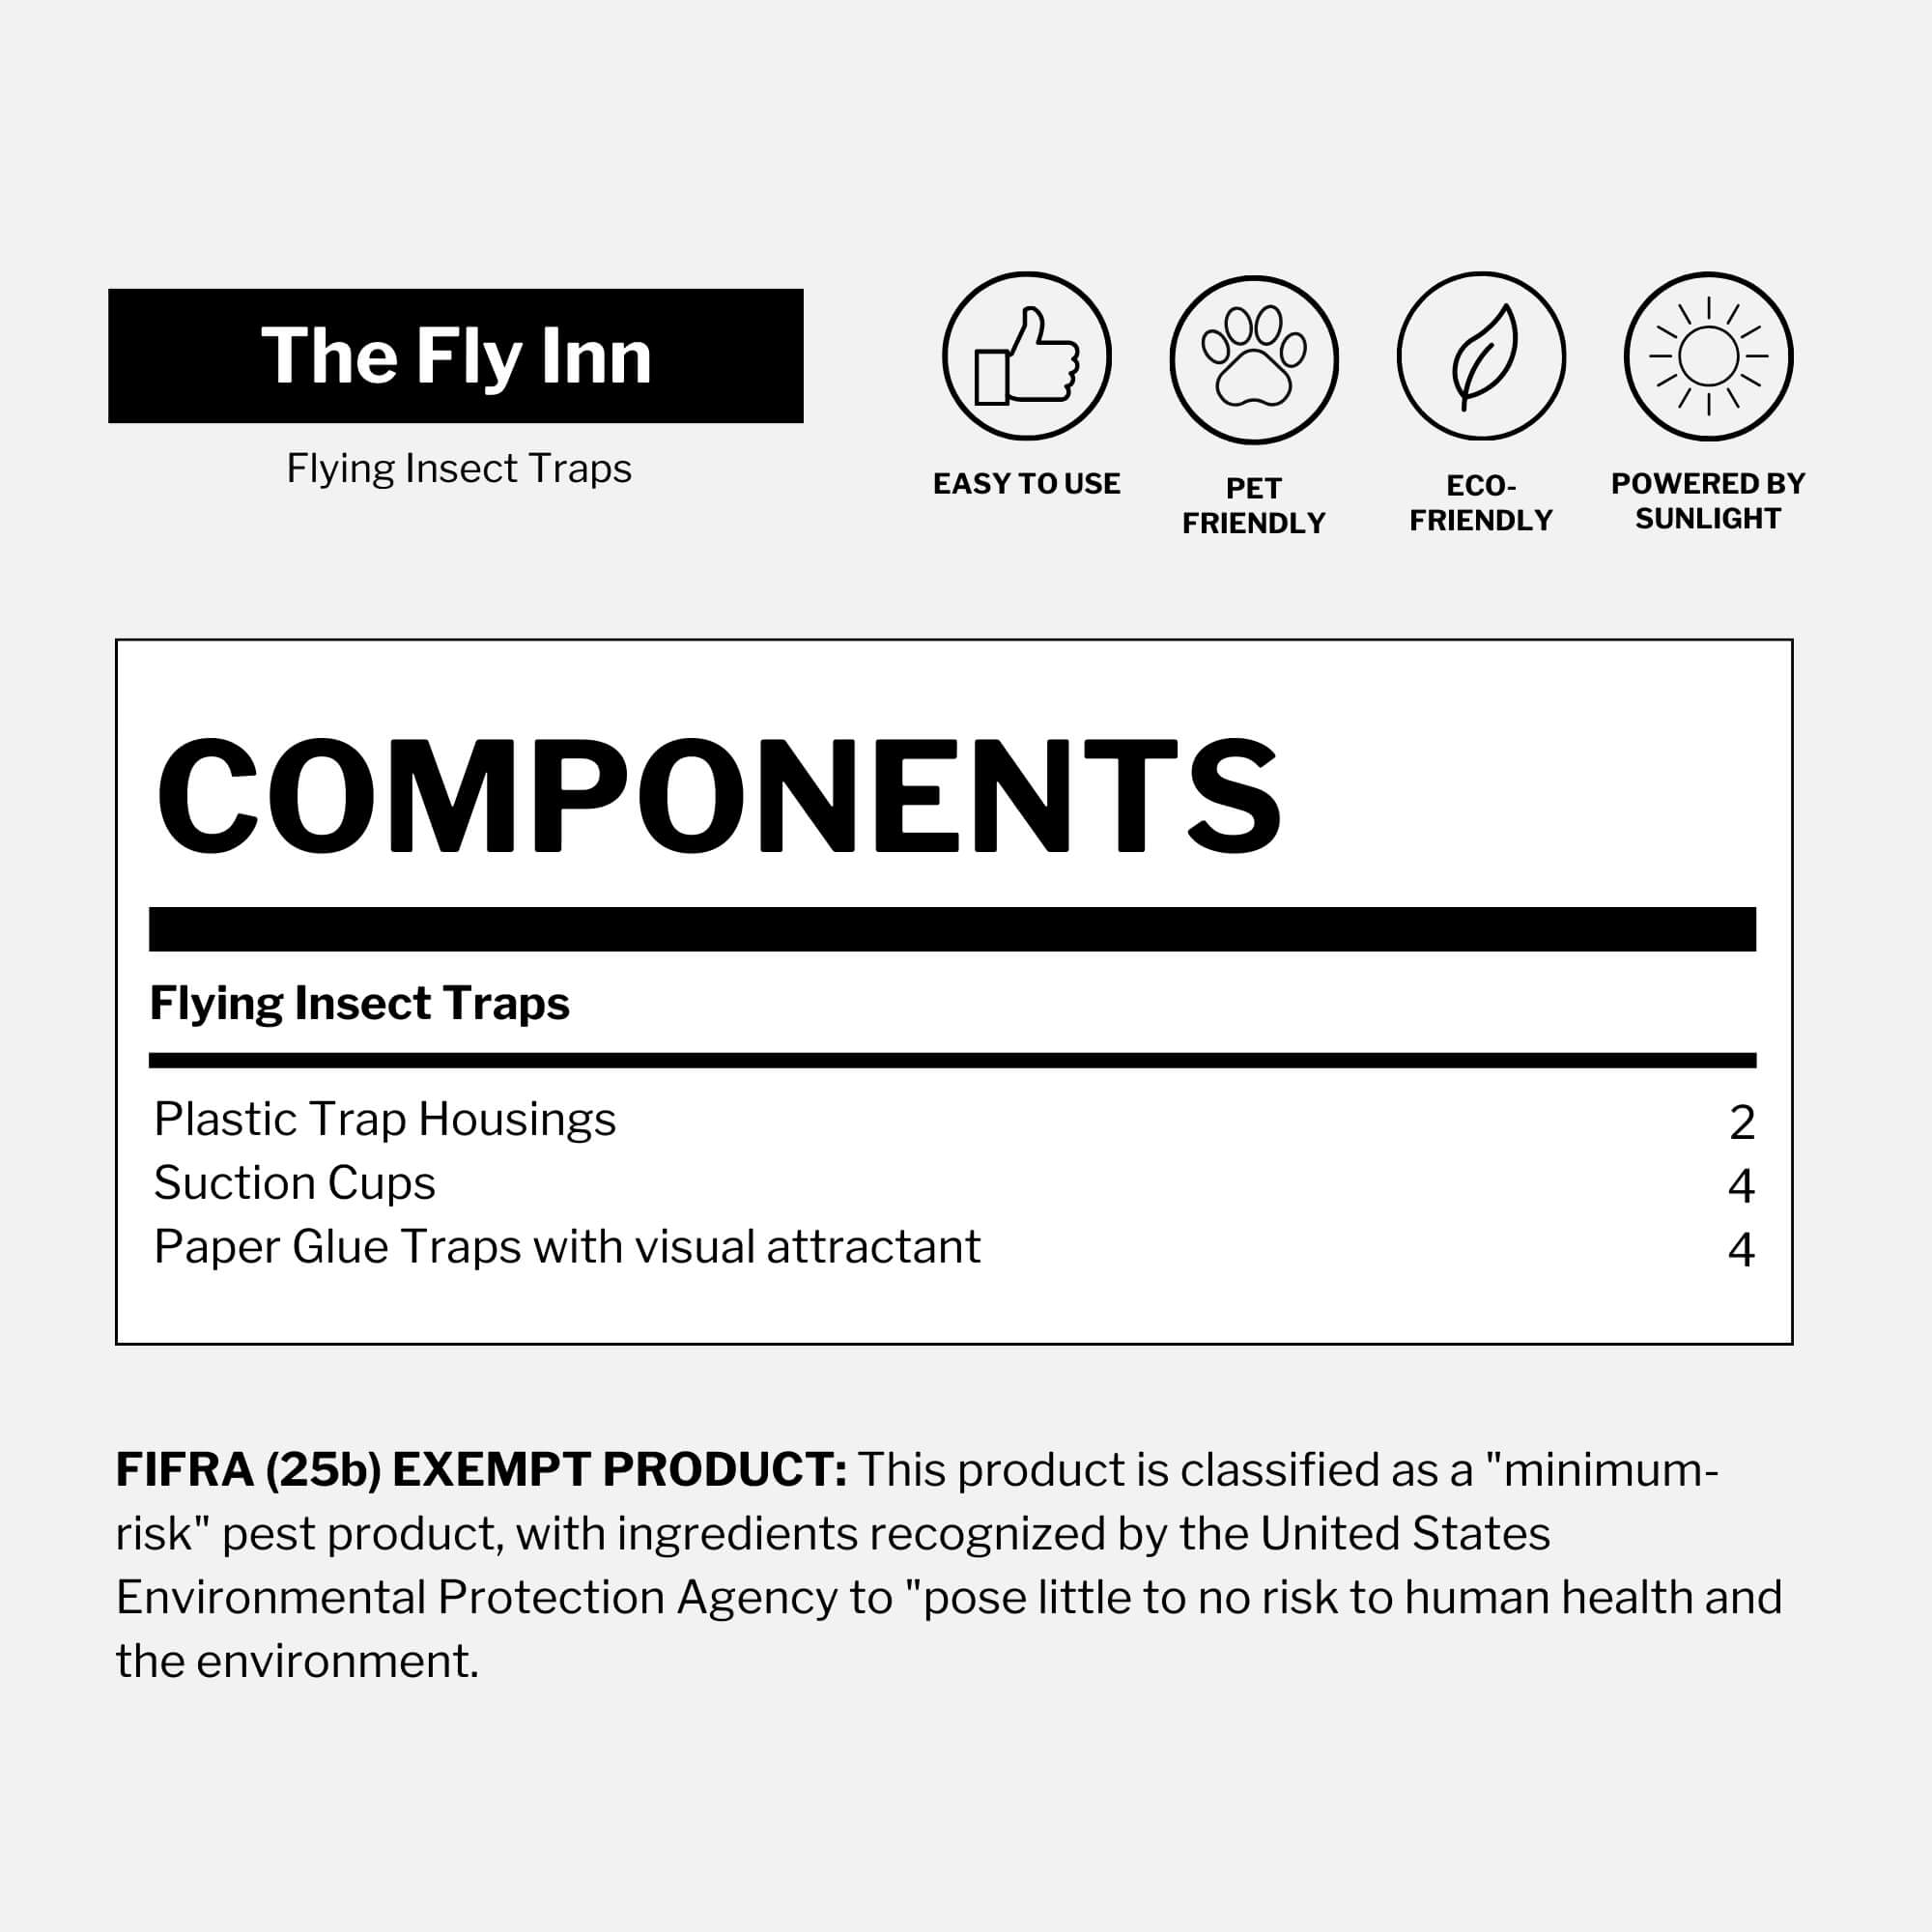 The Fly Inn Flying Insect Traps